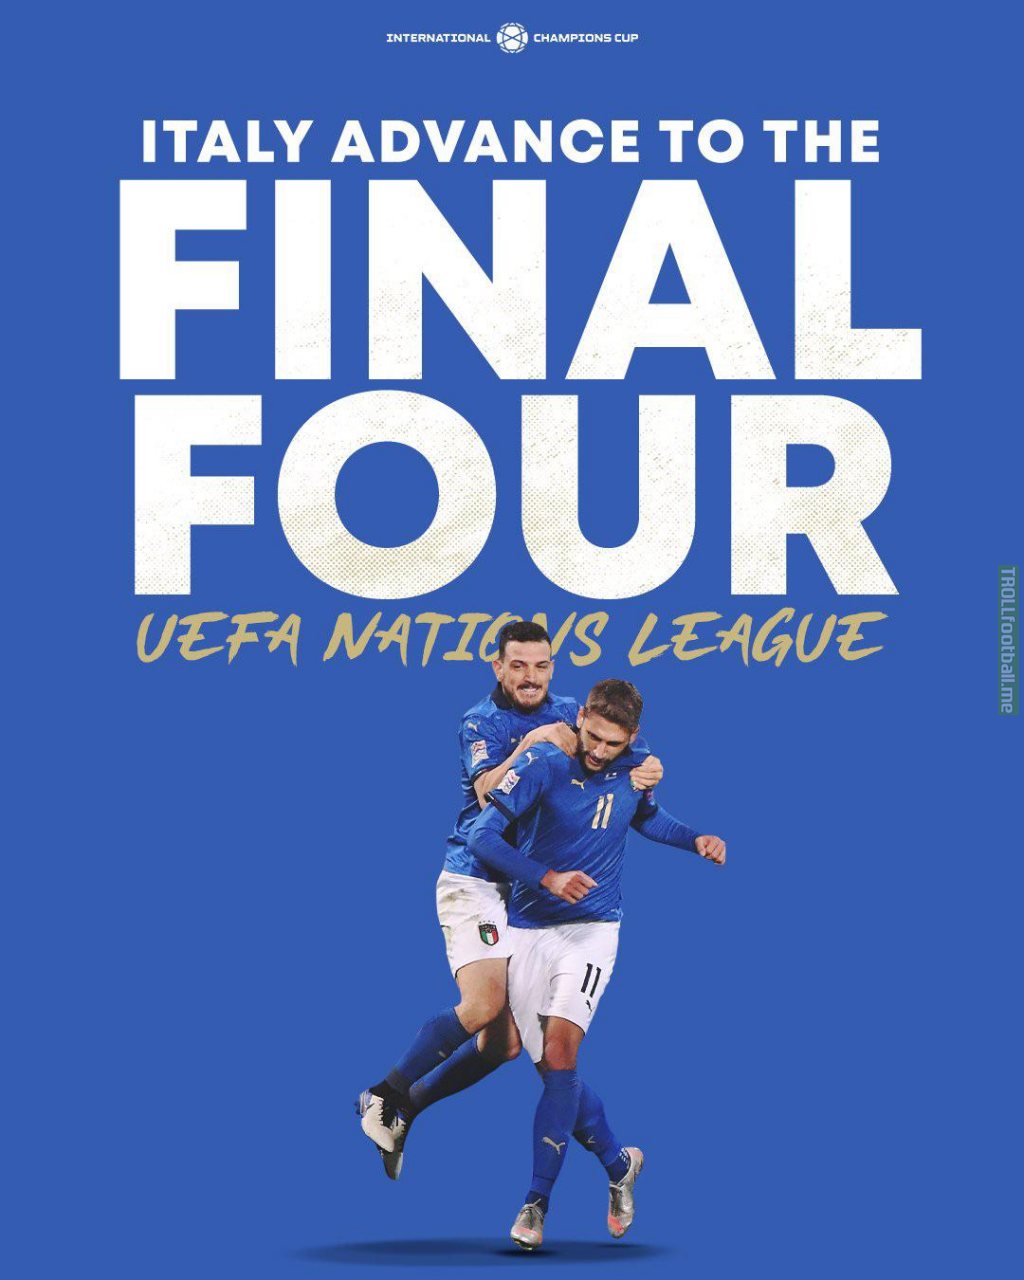 Italy are on a 22-match unbeaten run and qualify for the Final Four of the Nations League, which they will host next year